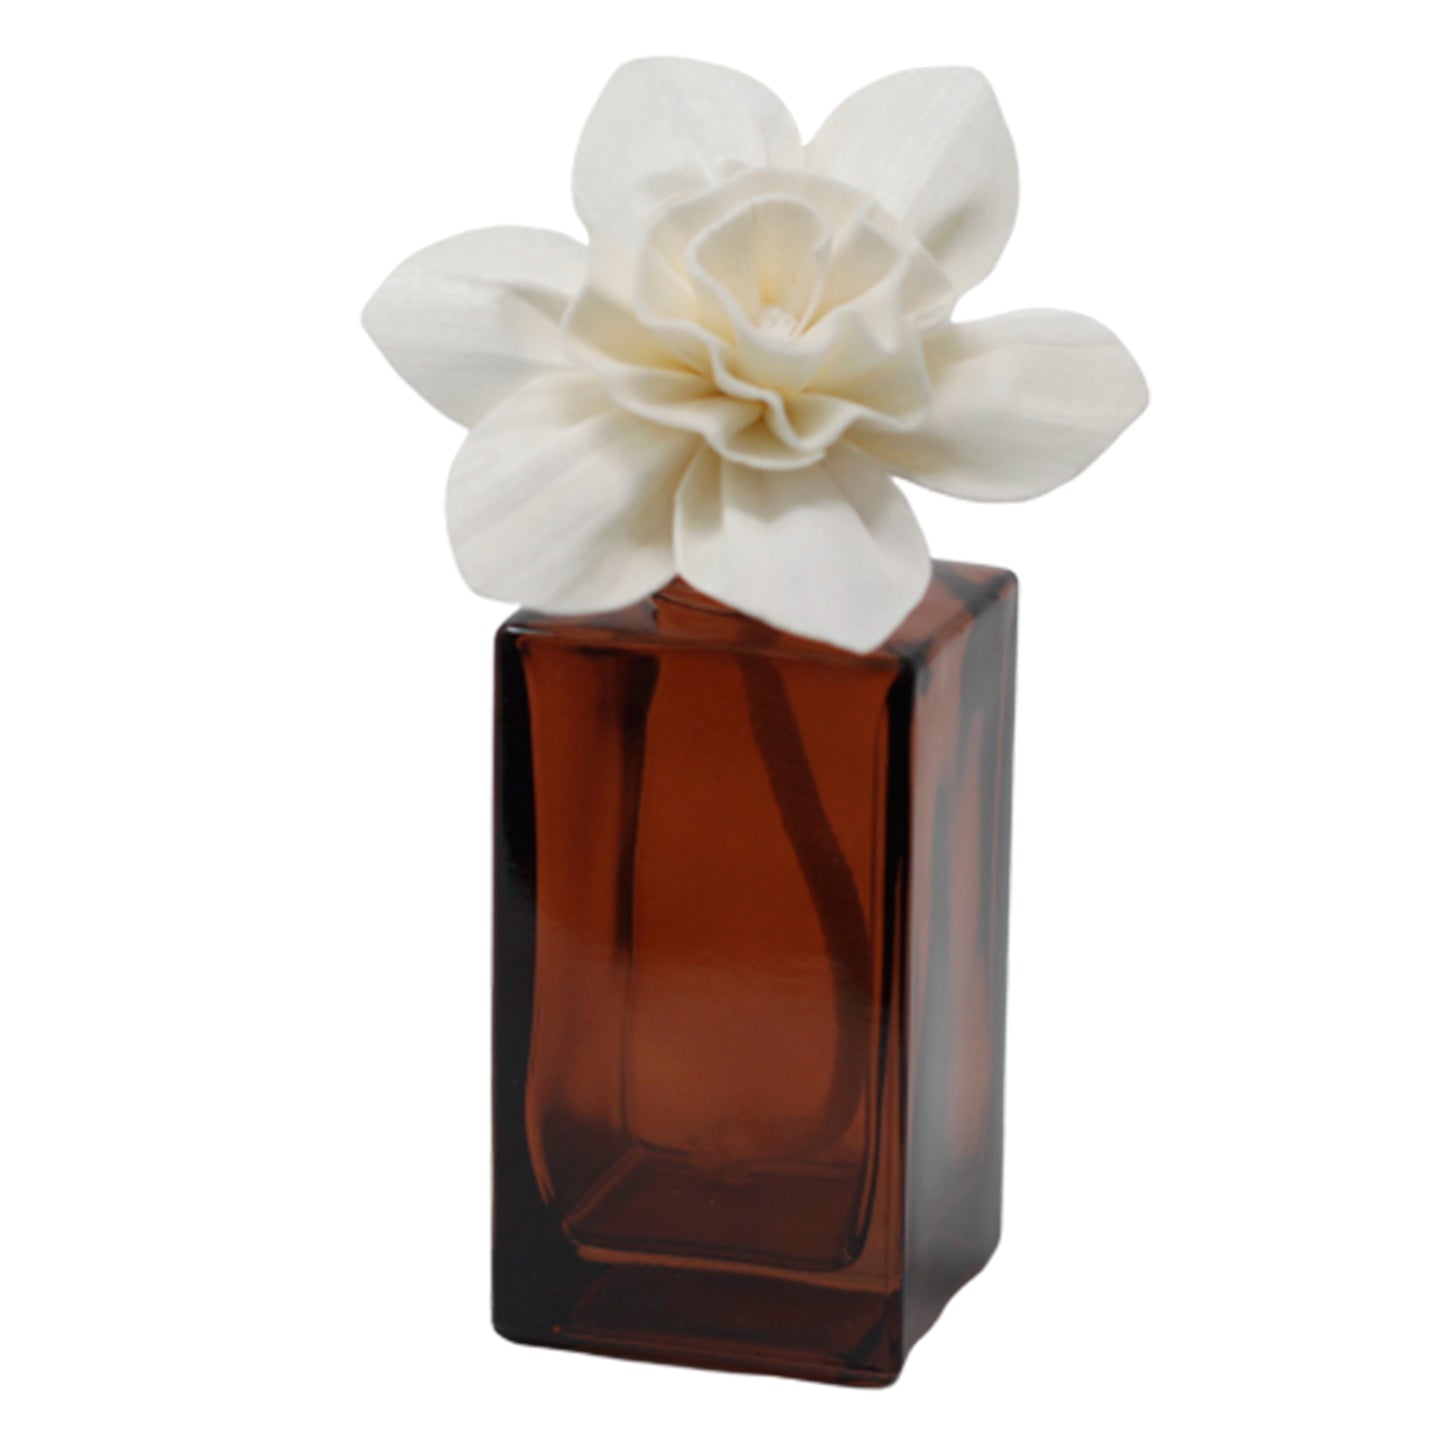 Natural Diffuser Flowers - Lrg Lily on String